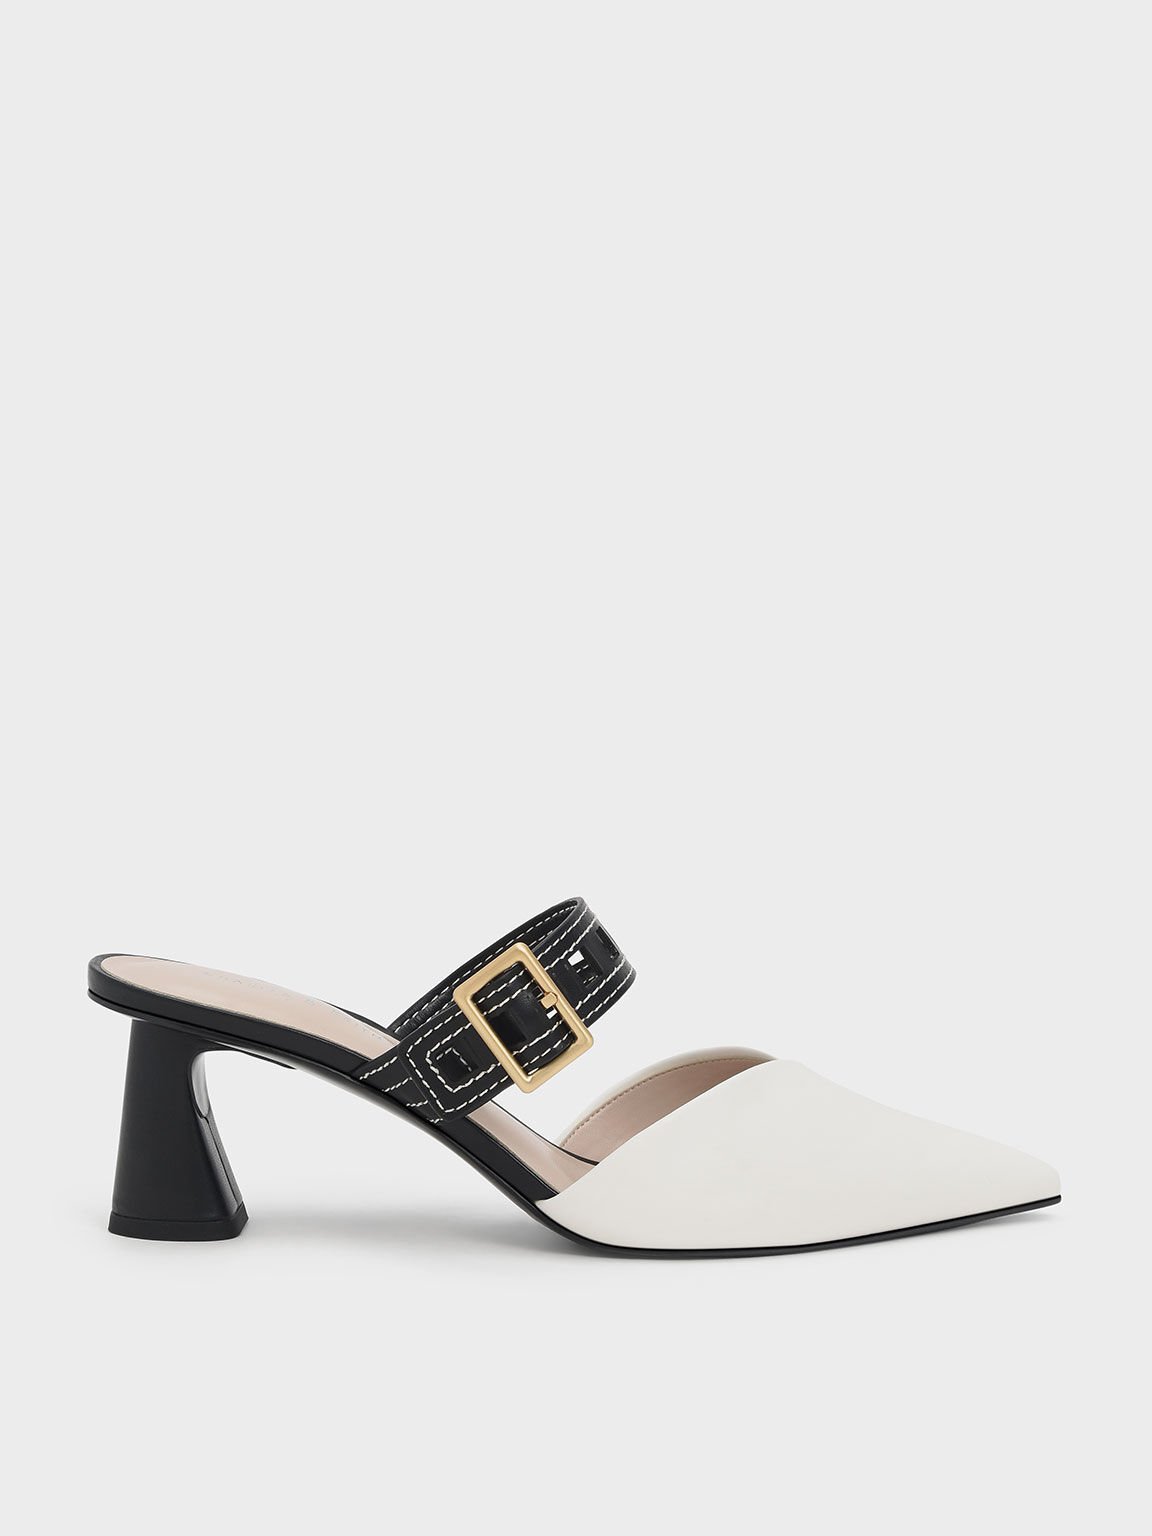 Charles & Keith Beaded Strap Heeled Sandals in White